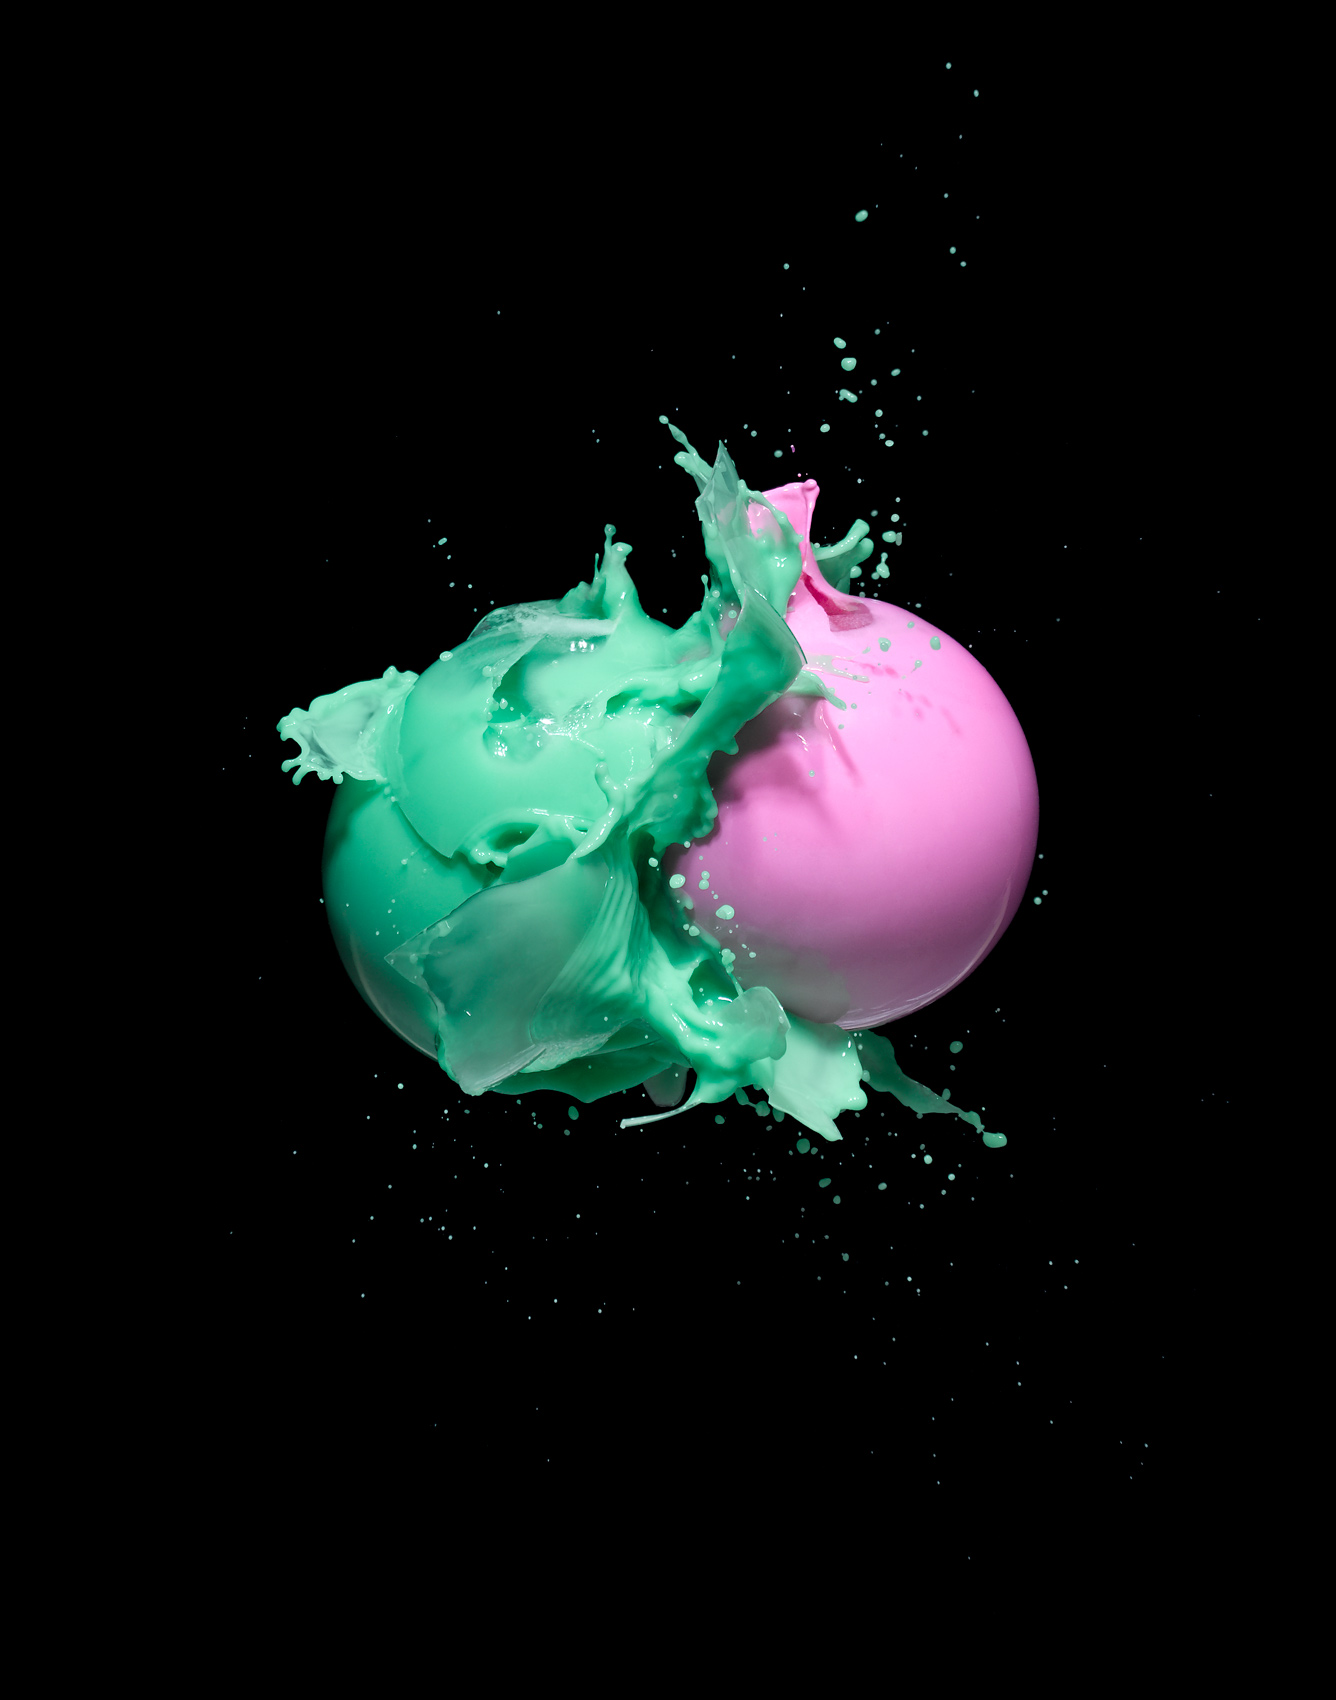 High speed explosion photography by Alexander Kent London based still life and product photographer.